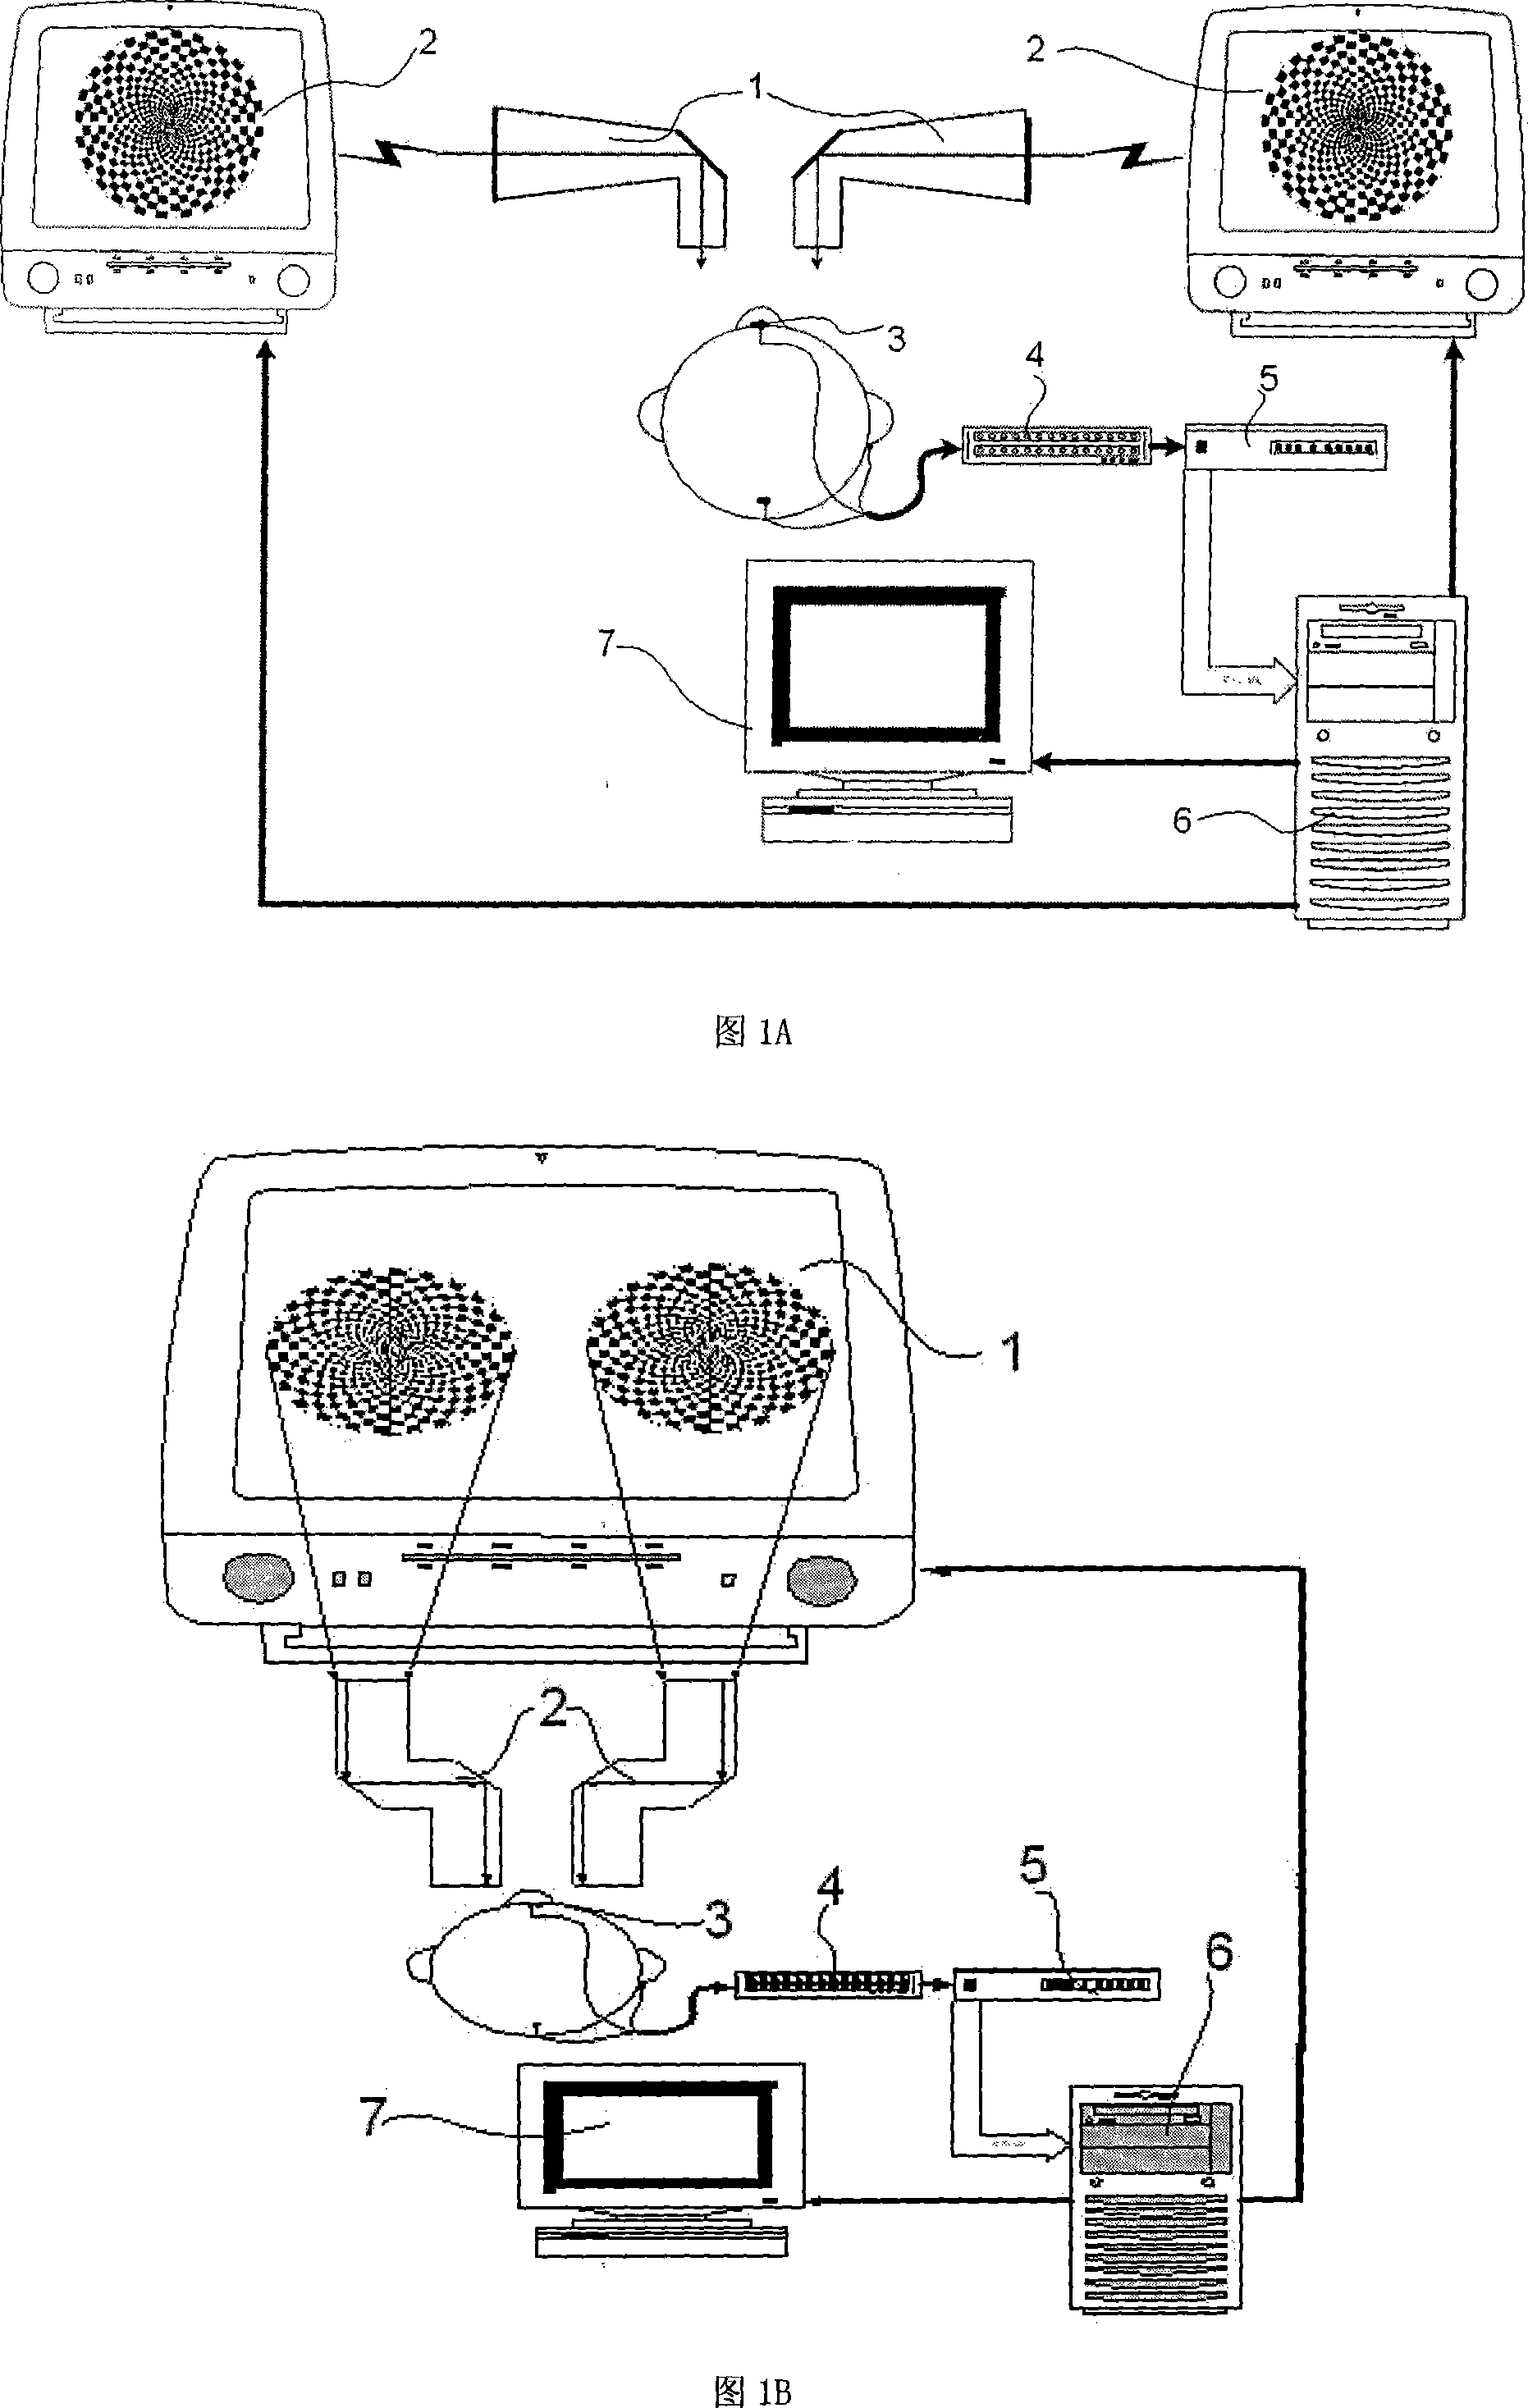 System and method for separating binocular vision induced potentials